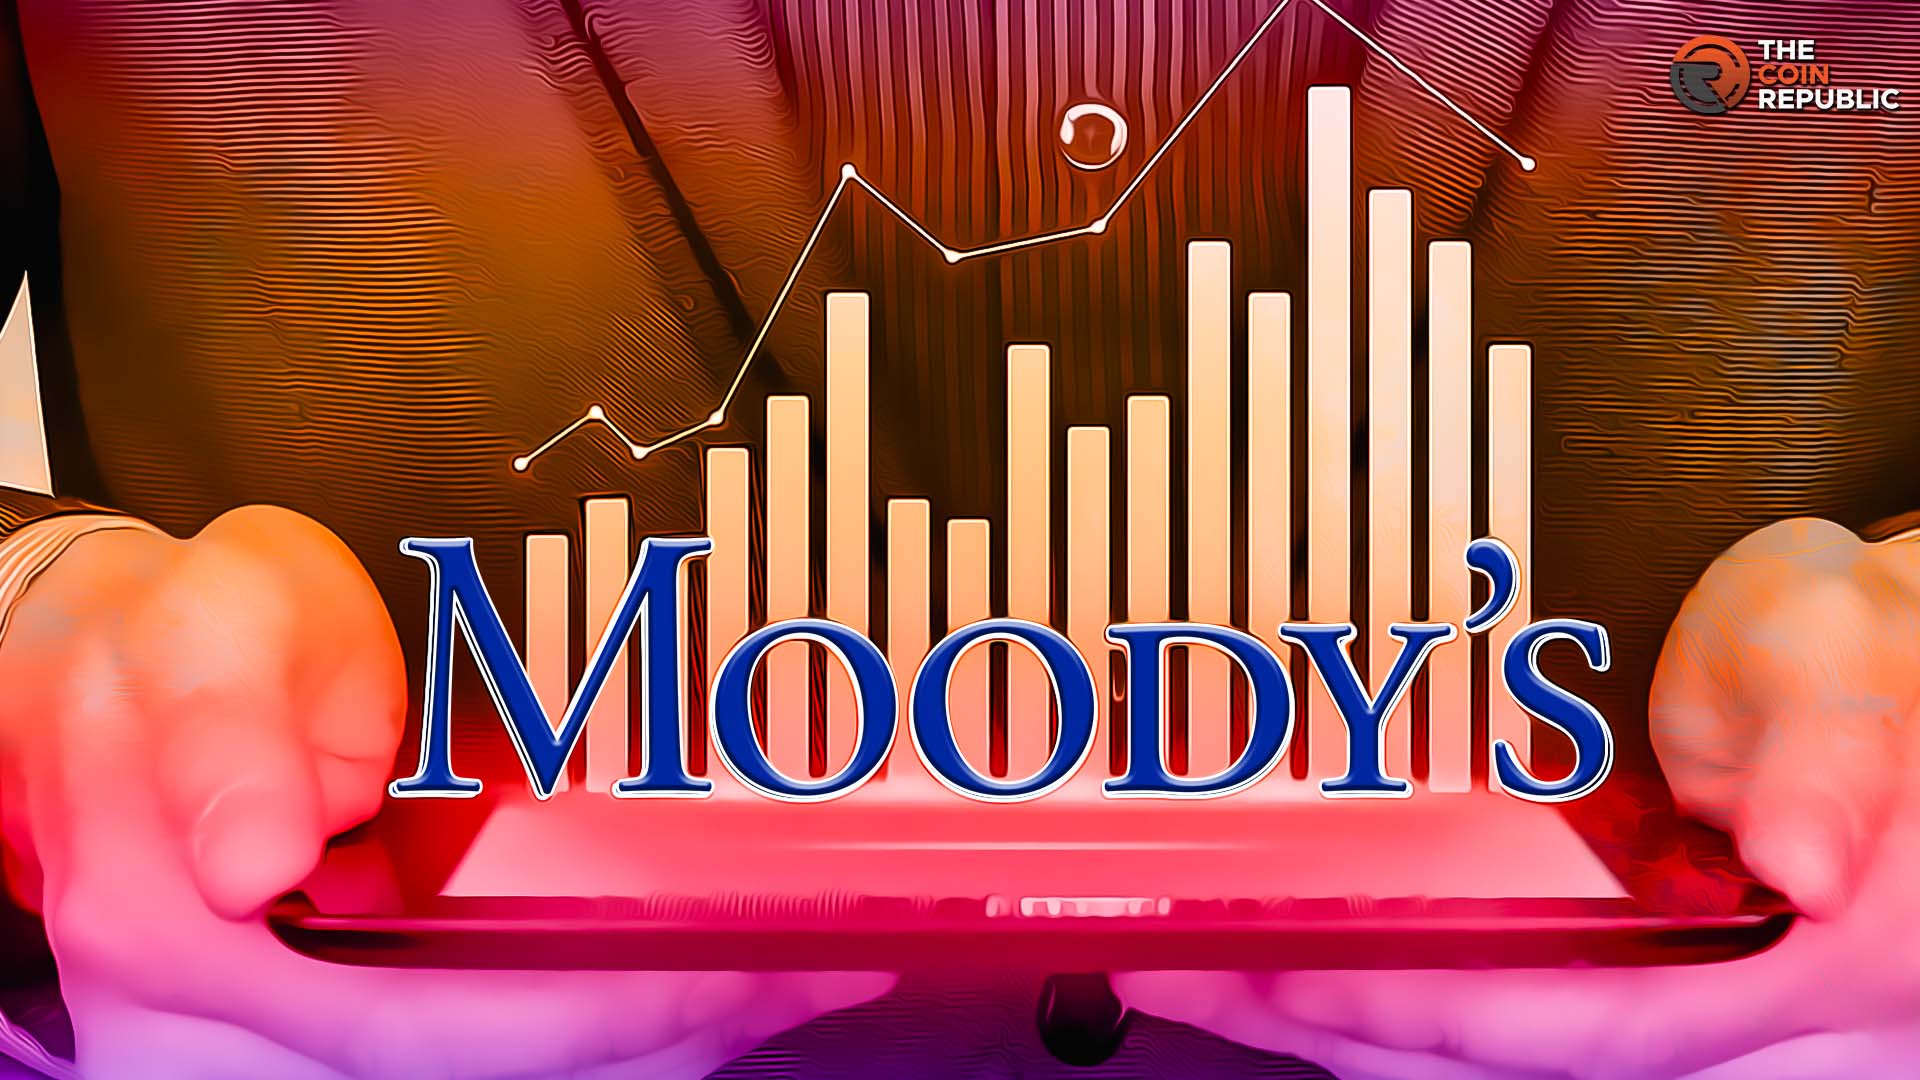 Moody’s Corp. Stock ( NYSE: MCO) Shows a breakout Favouring Bulls